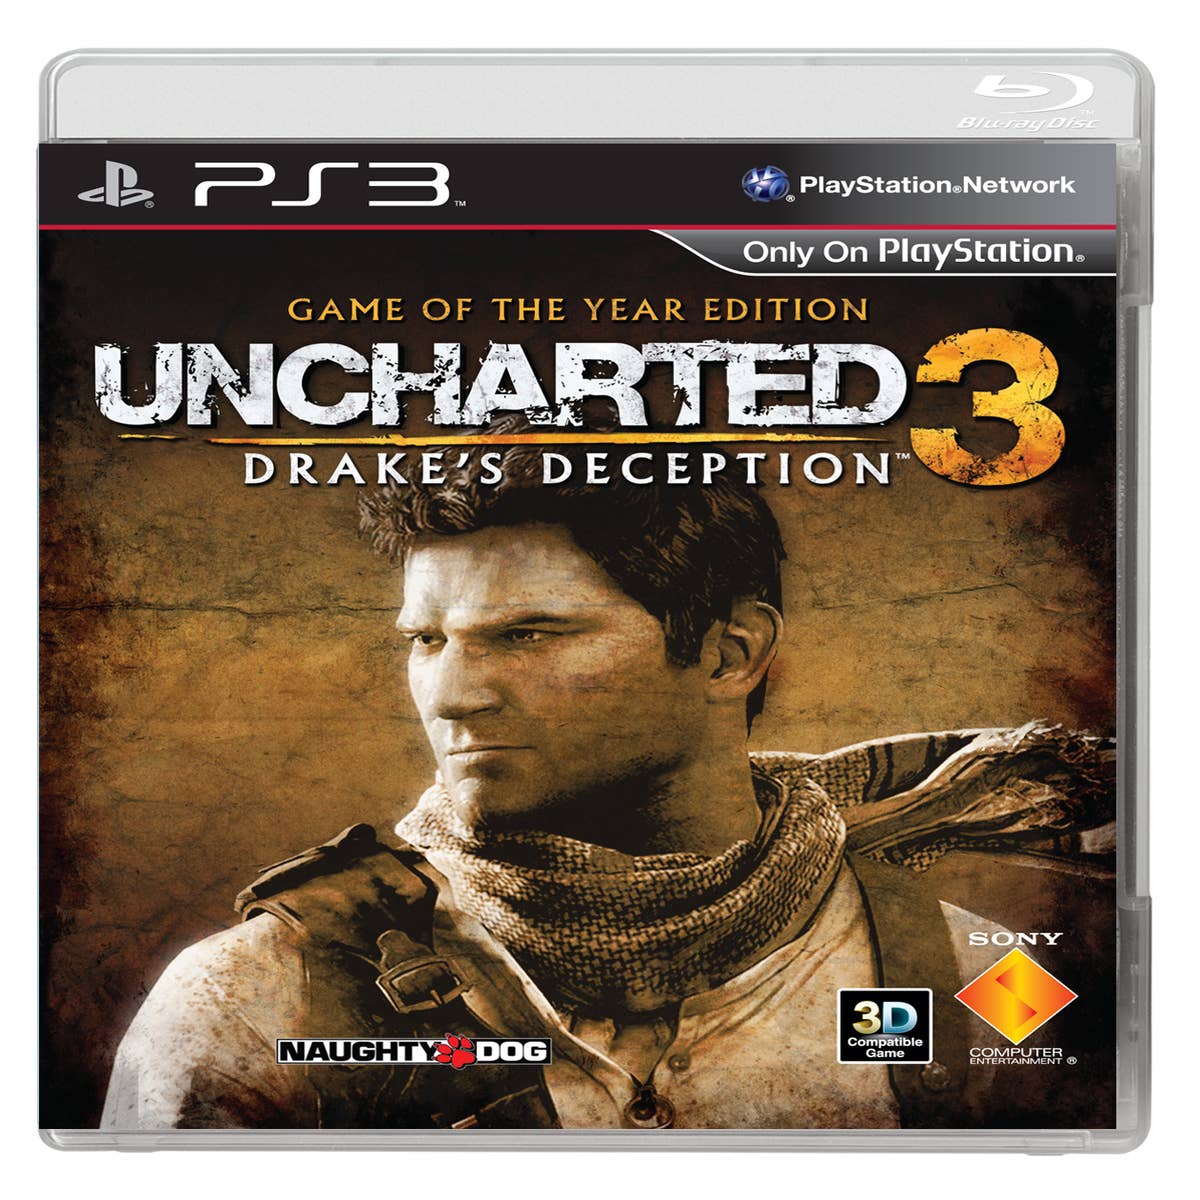 Uncharted 3: Drake's Deception (photos) - CNET